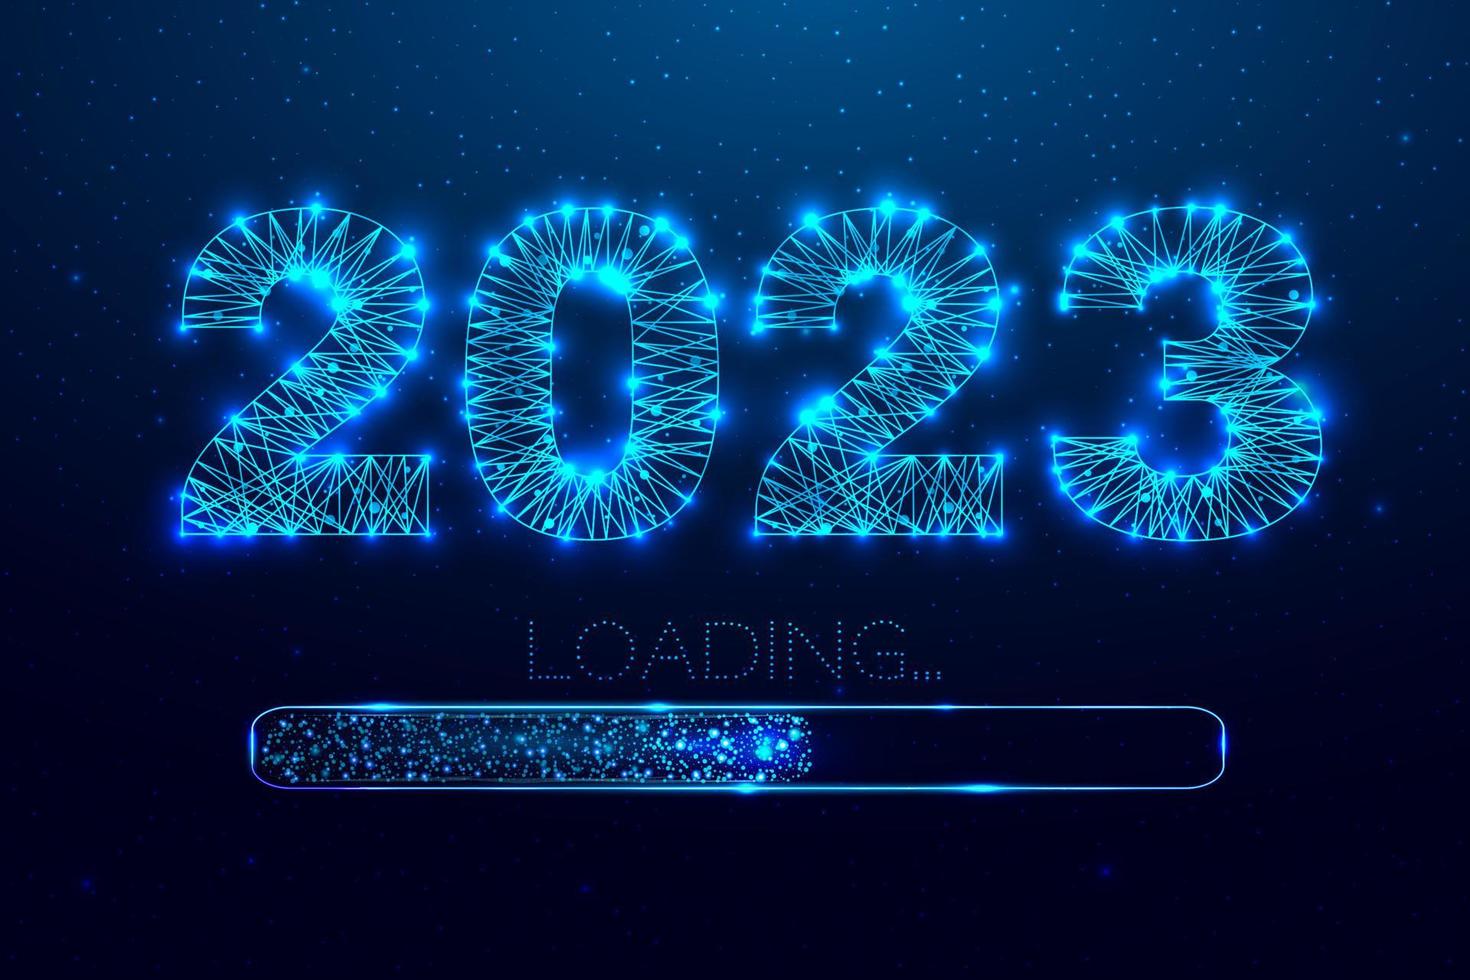 new year 2023 loading loading bar low poly style design numbers from a polygonal wireframe mesh abstract illustration on dark background vector